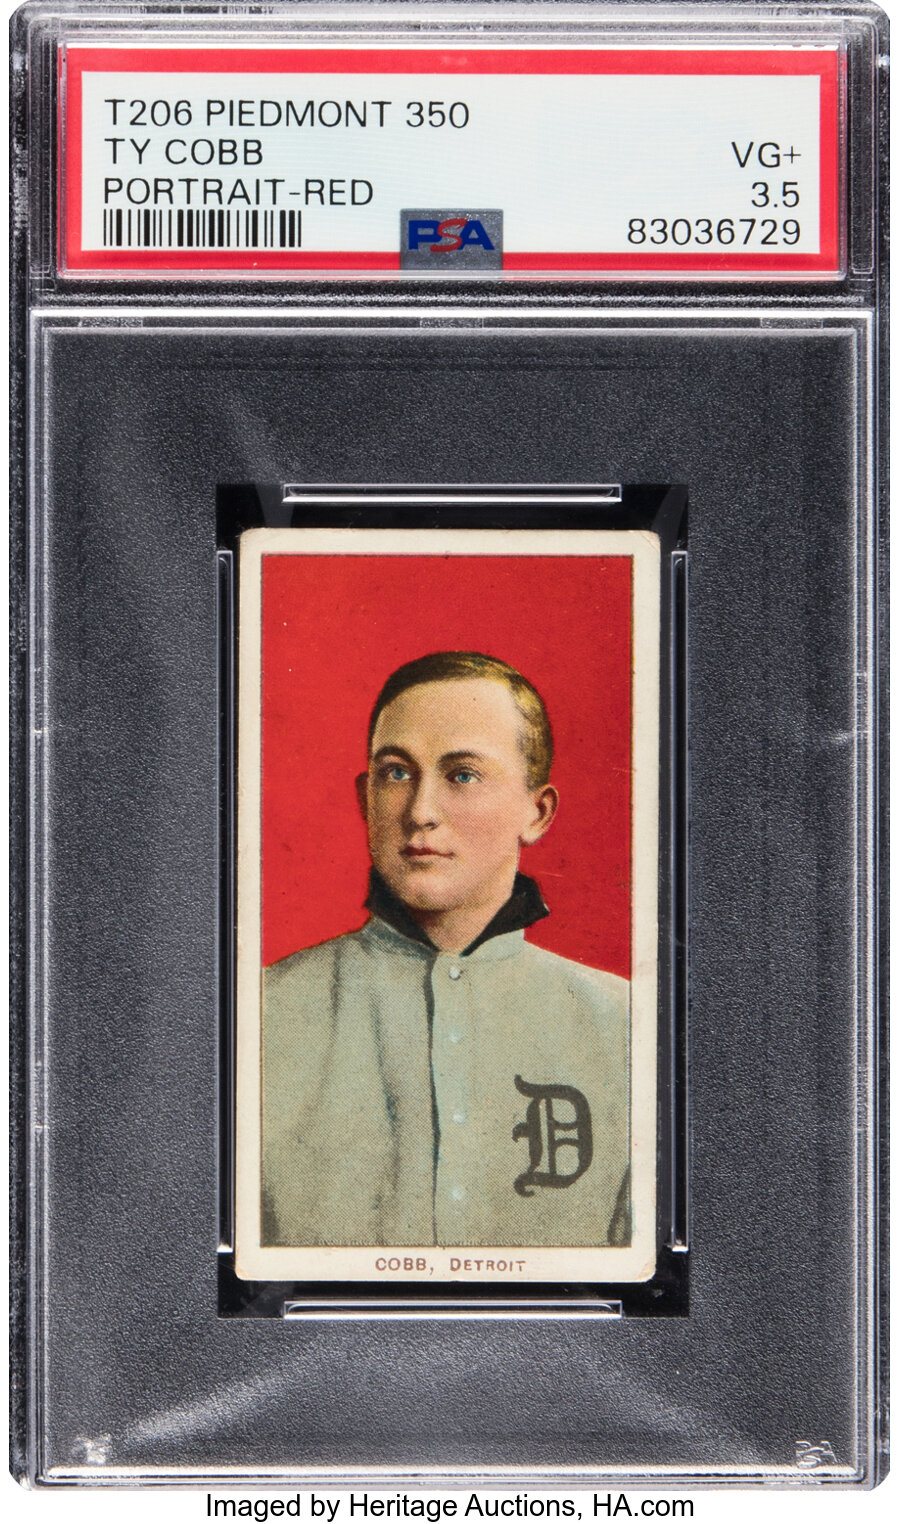 1909-11 T206 Piedmont 350 Ty Cobb (Red Portrait) PSA VG+ 3.5 -- From The Ramsburg Collection